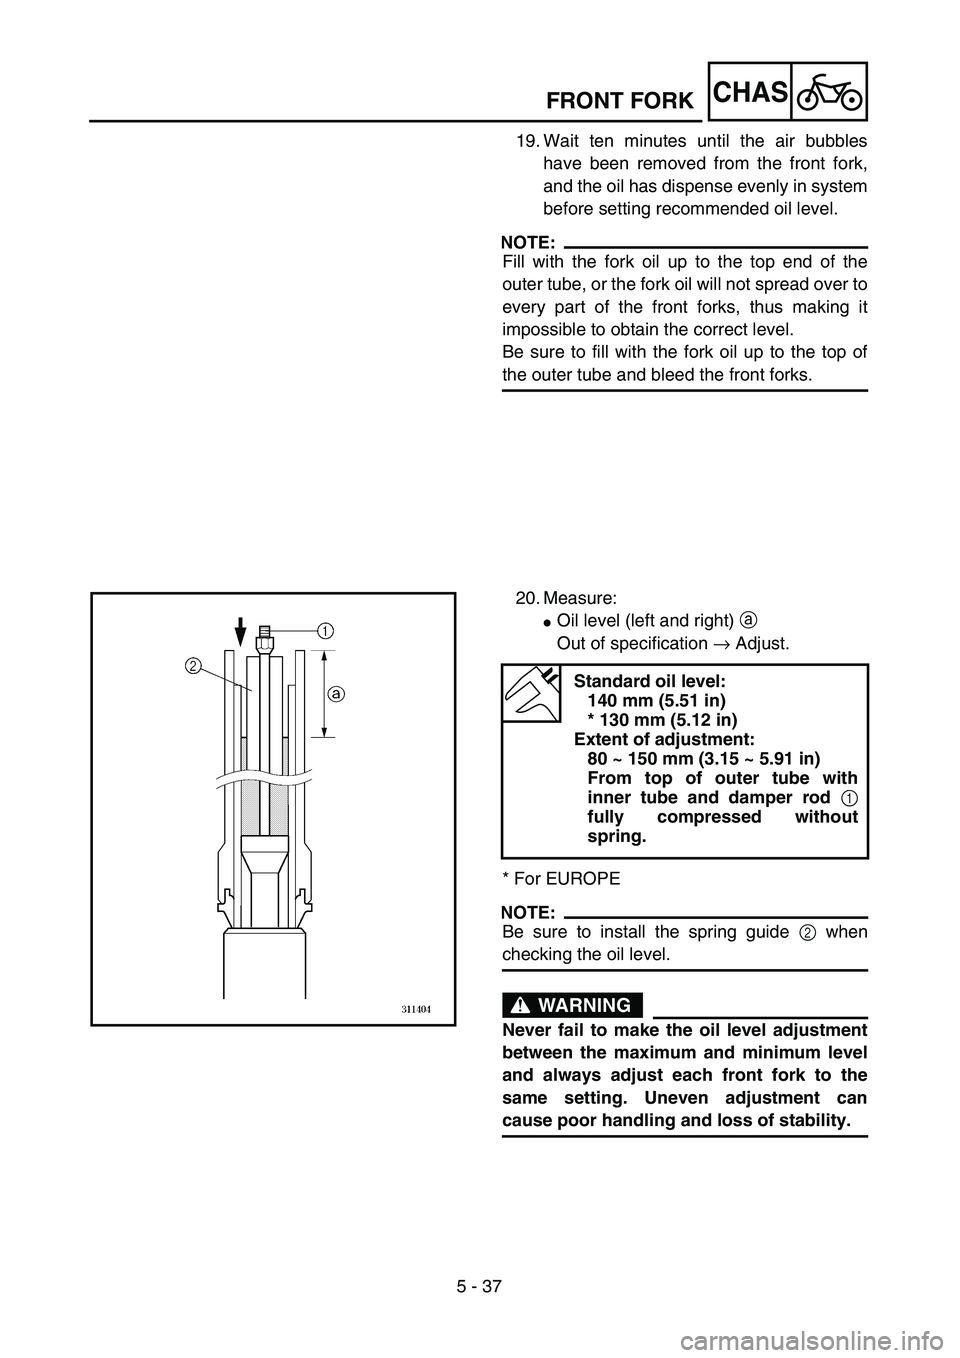 YAMAHA WR 250F 2002  Owners Manual 5 - 37
CHASFRONT FORK
19. Wait ten minutes until the air bubbles
have been removed from the front fork,
and the oil has dispense evenly in system
before setting recommended oil level.
NOTE:
Fill with 